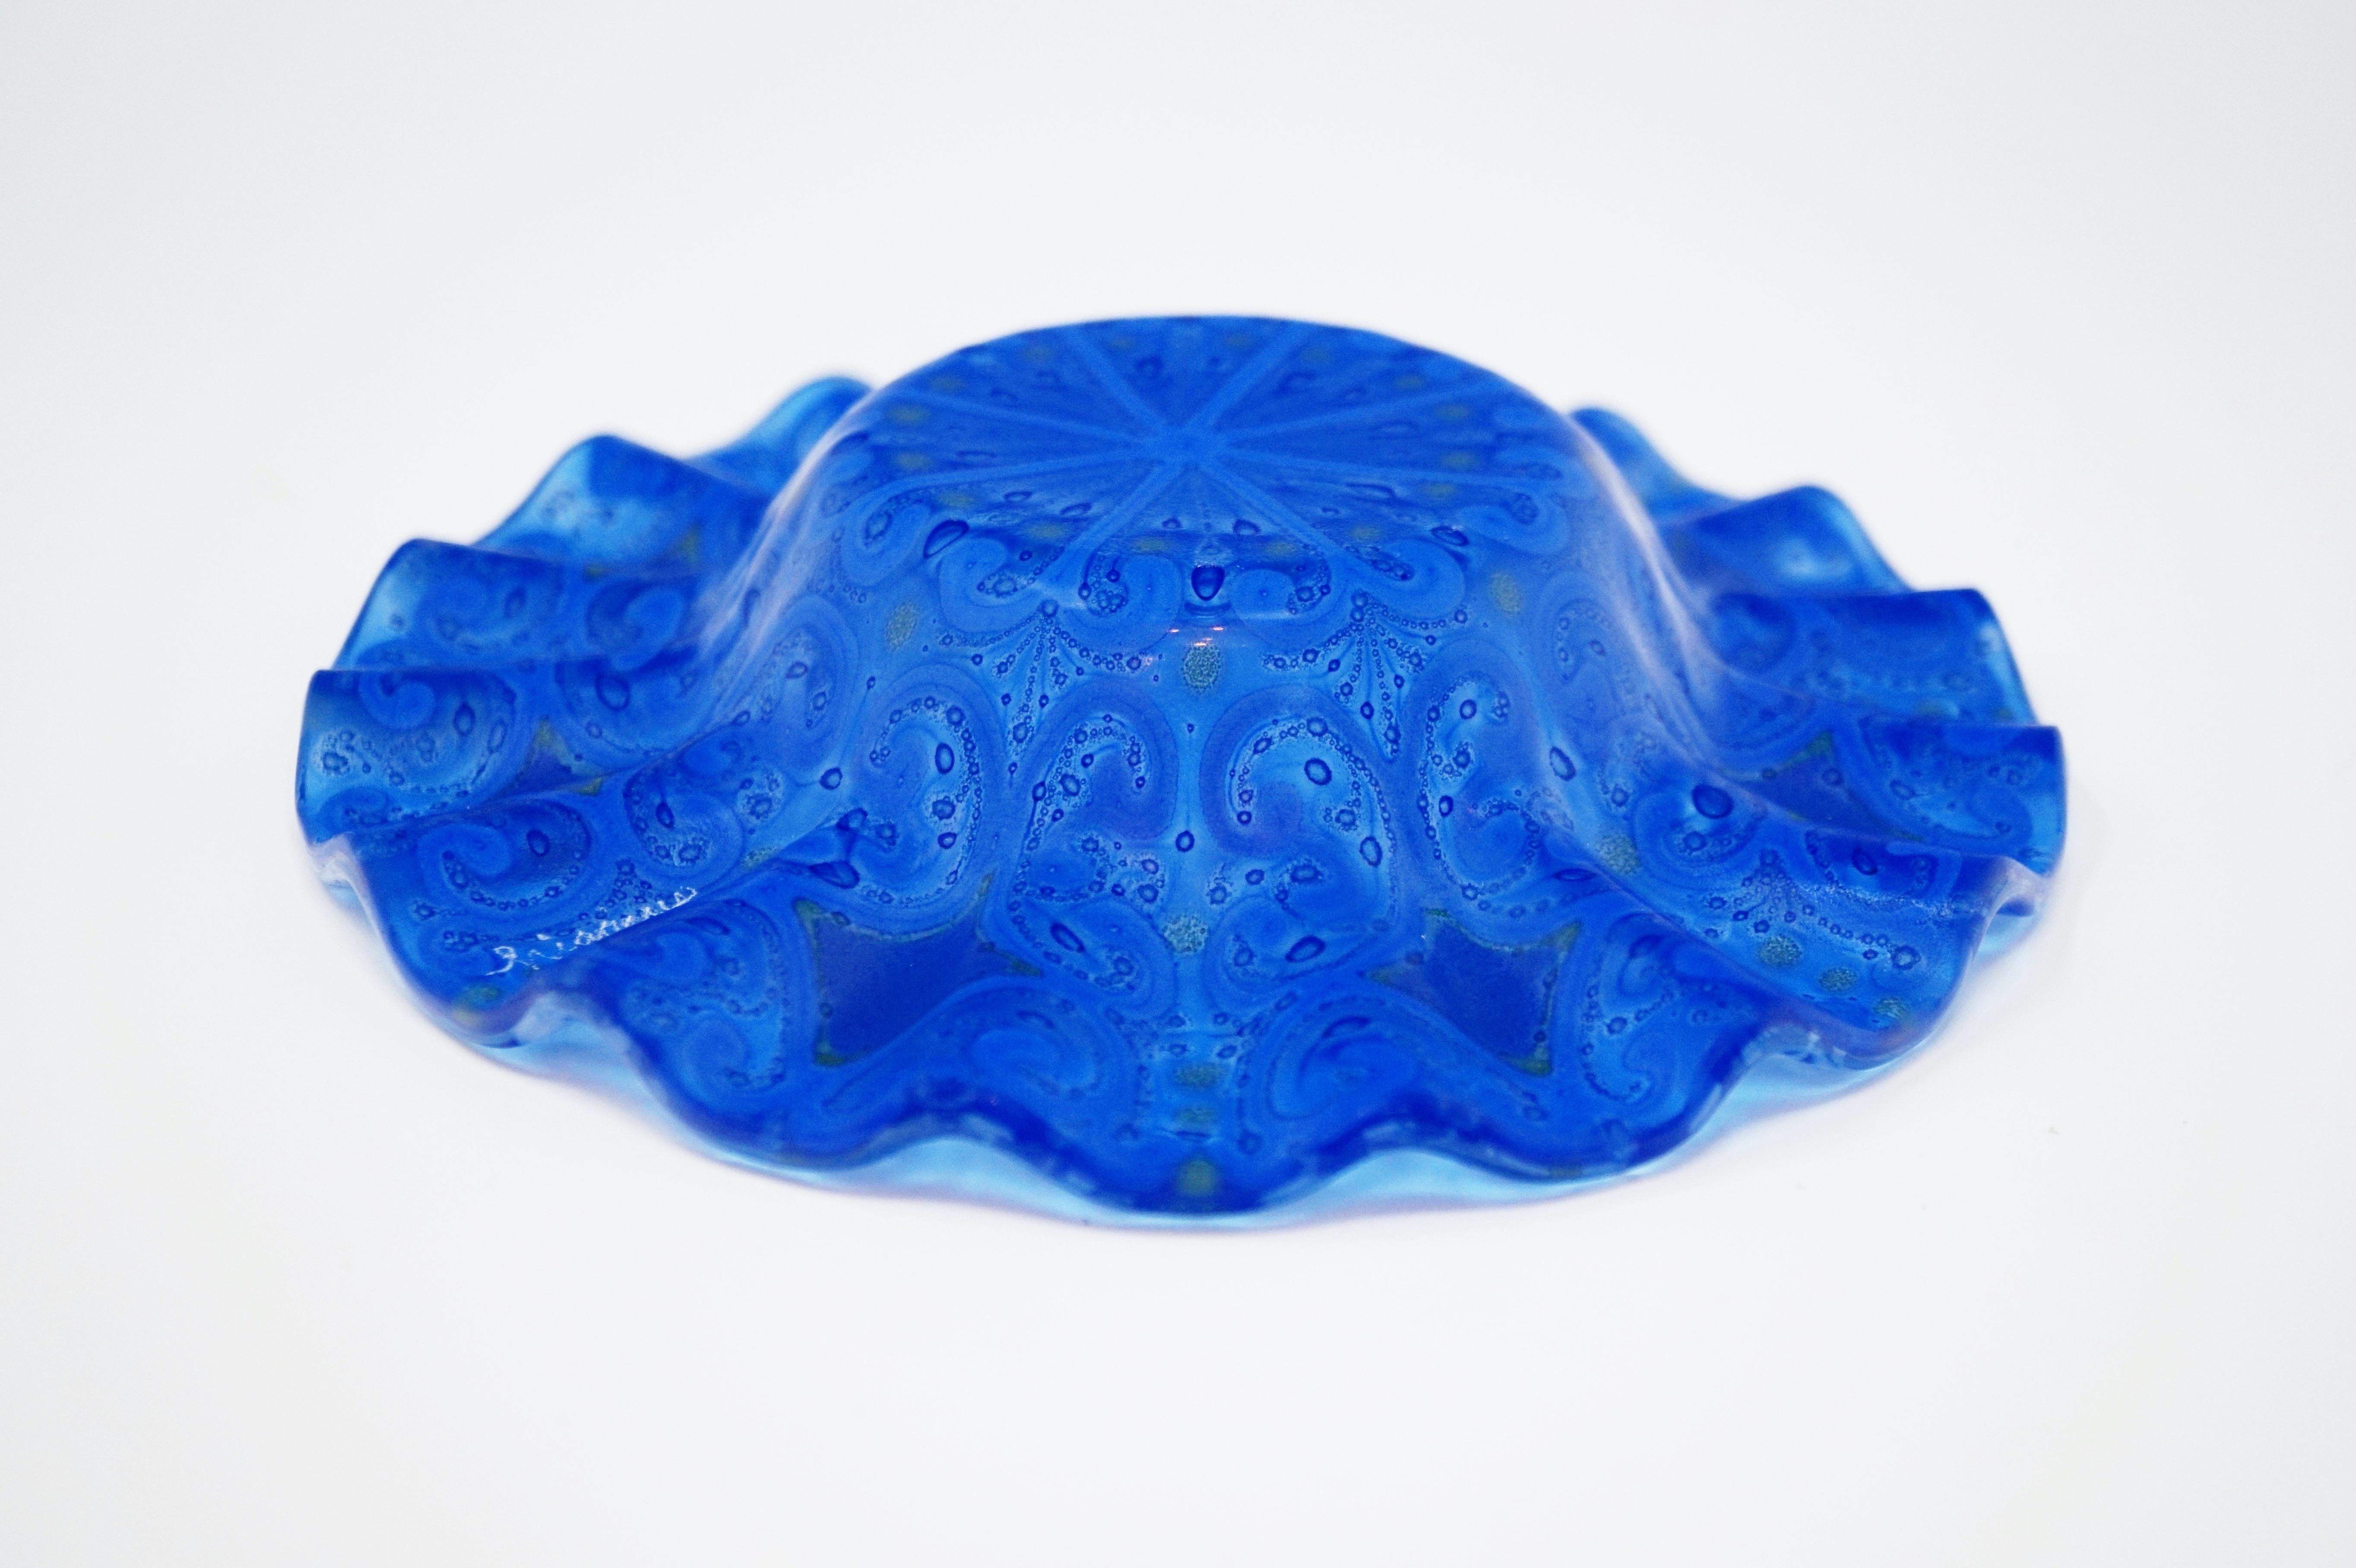 Mid-20th Century Fused Art Glass Decorative Bowl or Ashtray by Higgins, Signed, circa 1950s